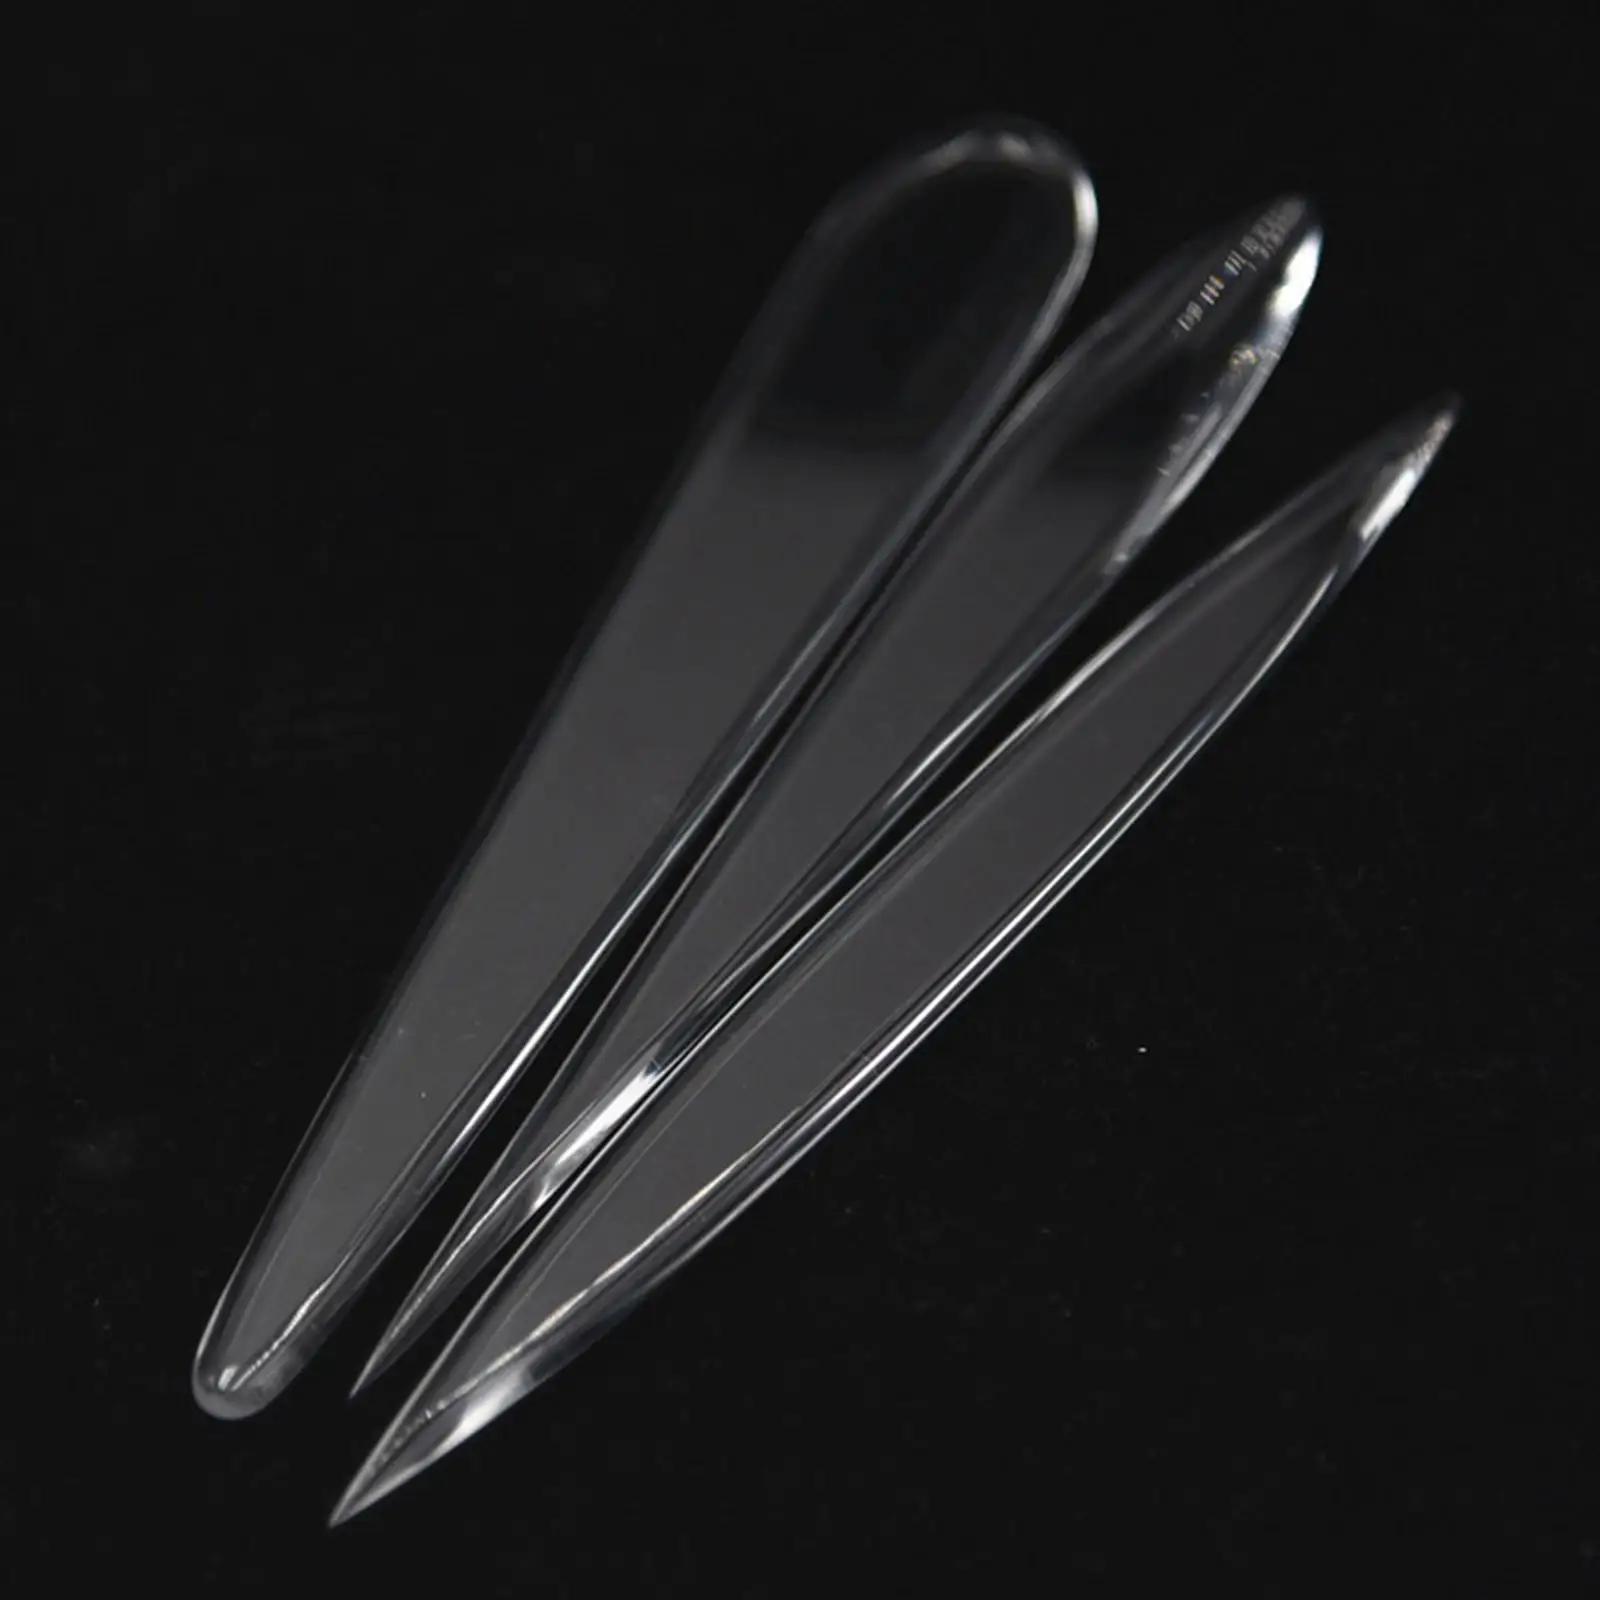 3Pcs Clay Sculpting Tools Acrylic Clear Modeling Tools Polymer Clay Shaping Tools for Carving Enthusiasts Dough Figurines Clay